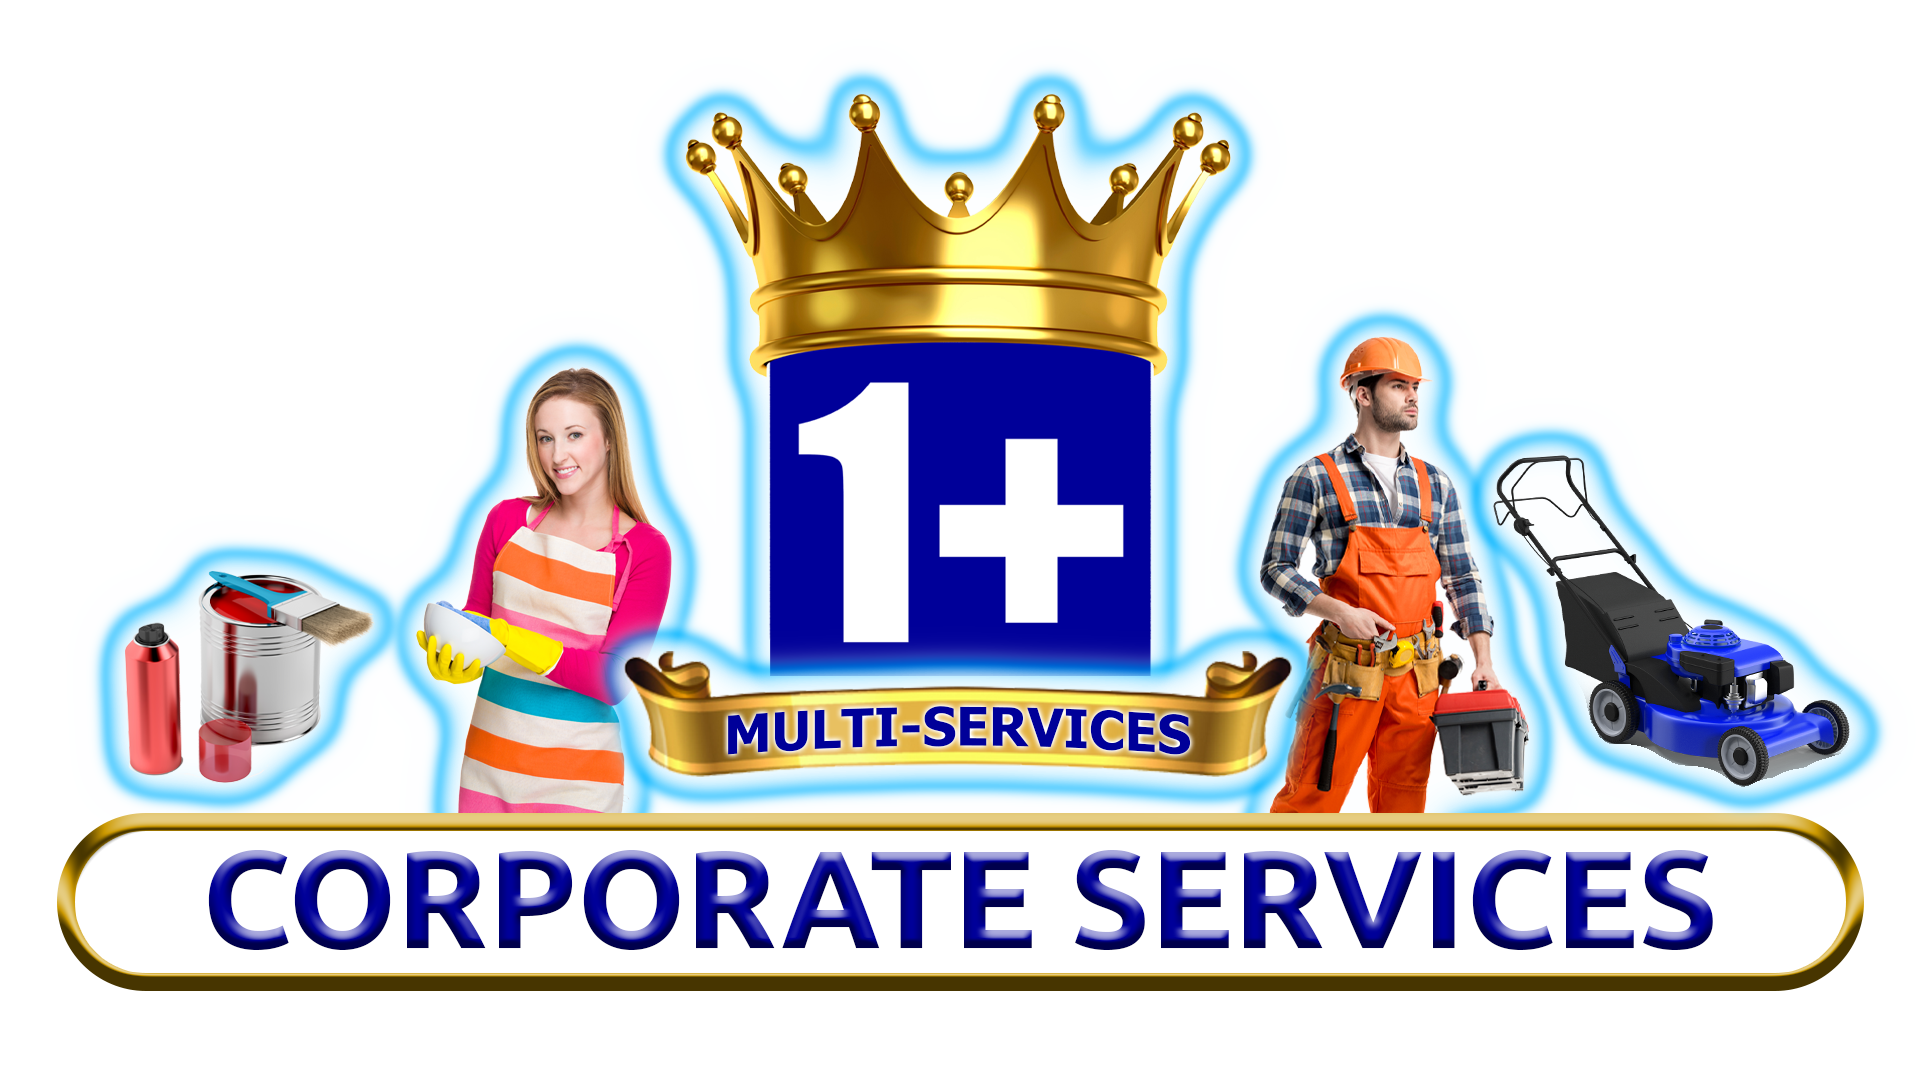 Home And Corporate Services By 1+Multi - Cleaning - Lawn Care - - Houston Texas - Nassau Bay Texas - Seabrook Texas - Kemah Texas 2